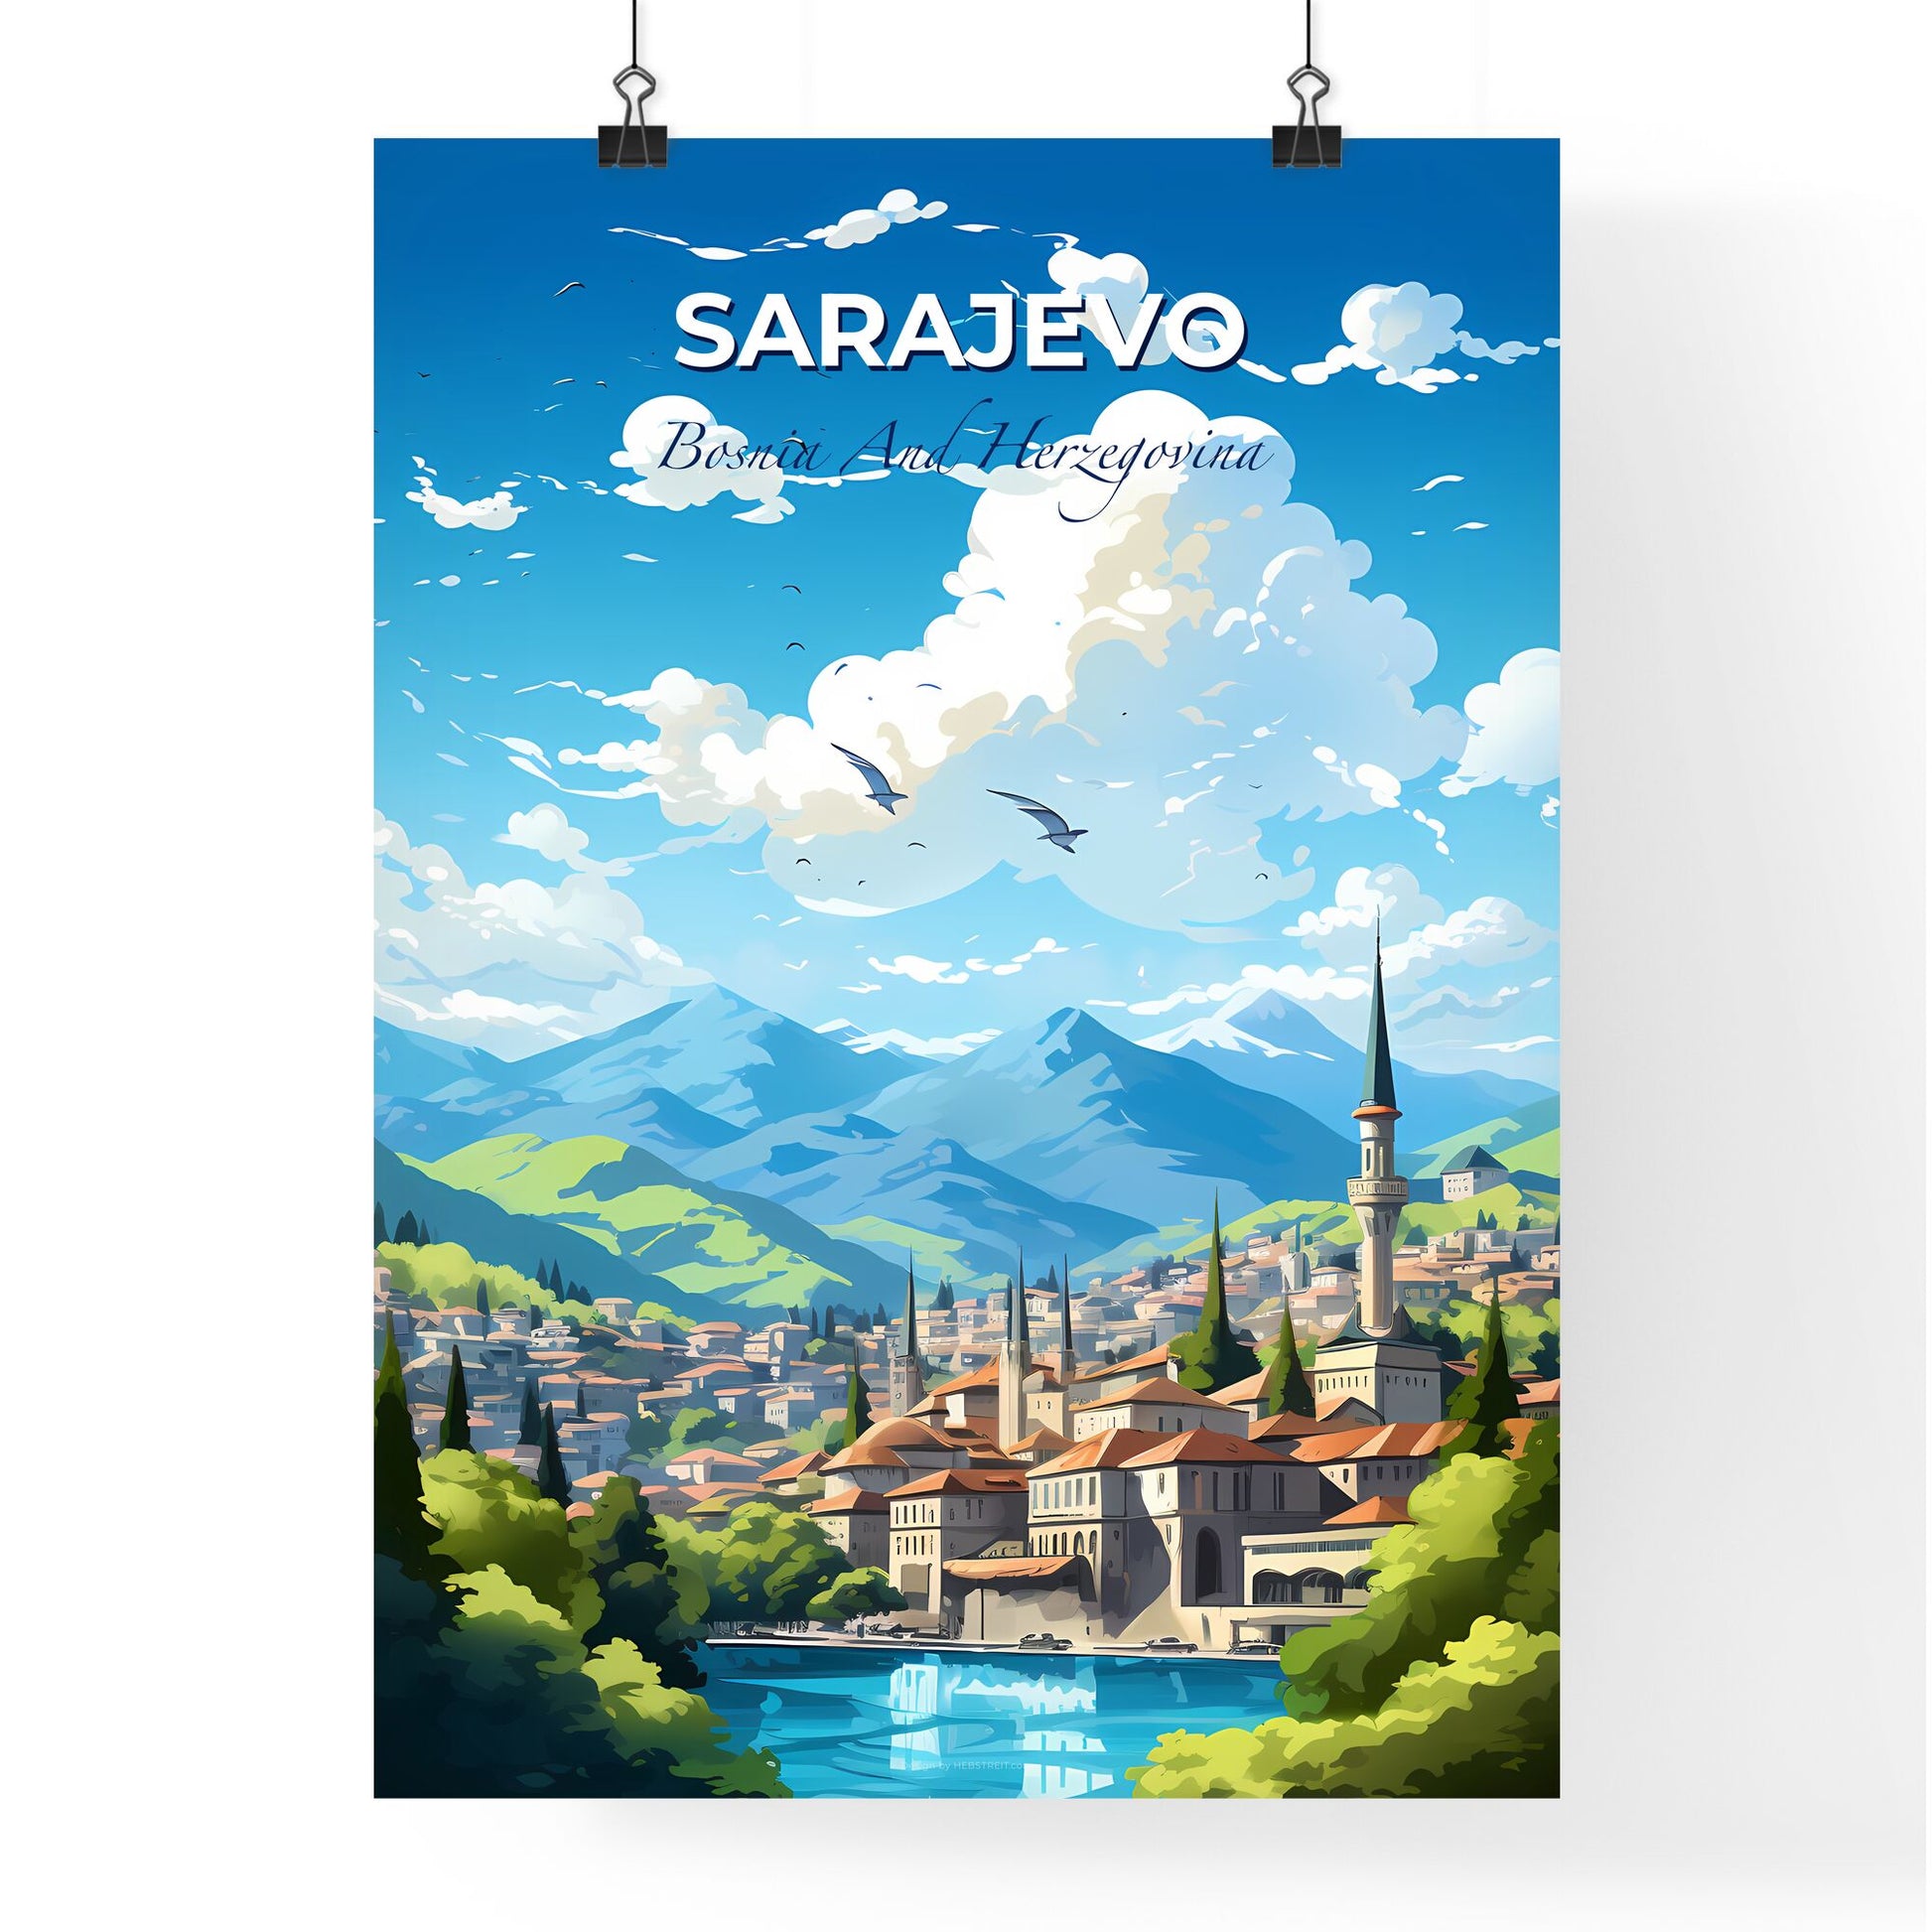 Sarajevo Bosnia And Herzegovina Skyline - A Landscape Of A Town With Trees And Mountains - Customizable Travel Gift Default Title